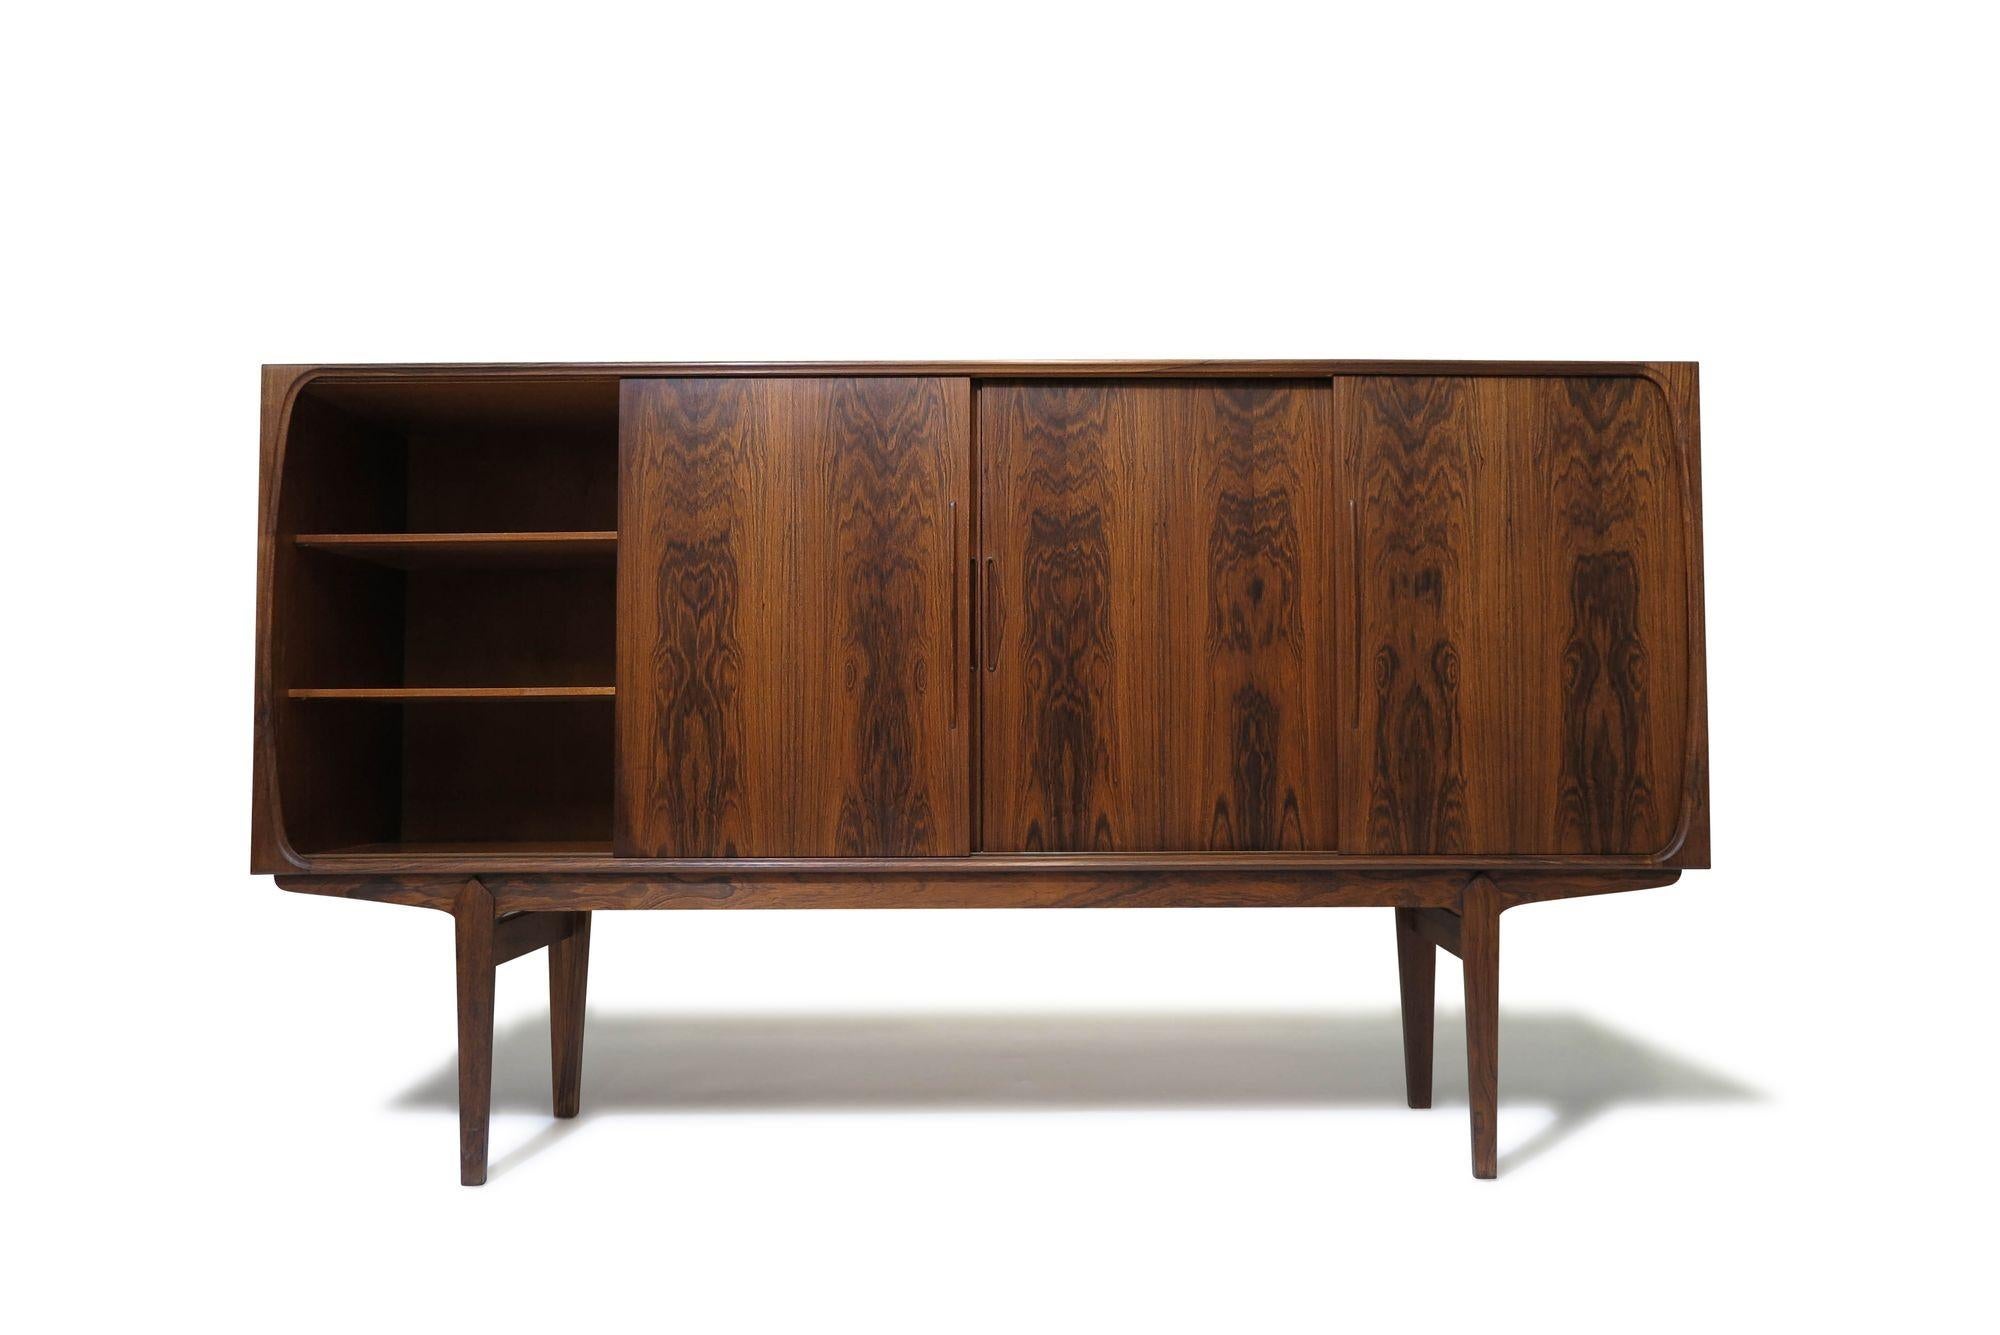 Mid-century Danish Brazilian Rosewood sideboard credenza with stunning book-matched grain, raised on stilted legs. The cabinet features four sliding doors with sculpted pulls, revealing a mahogany interior with adjustable shelves, and a center